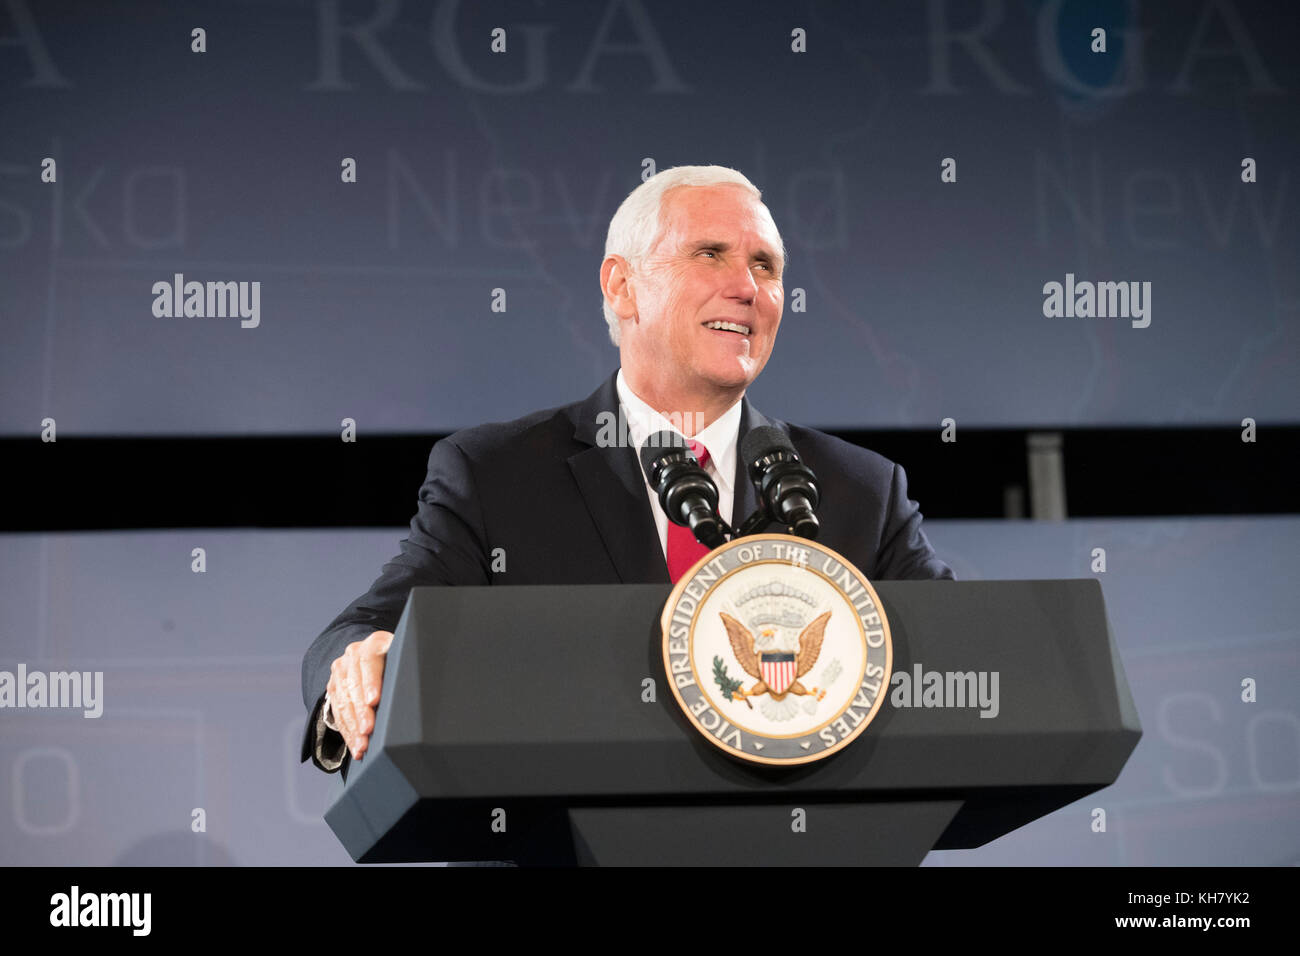 Austin, Texas USA Nov. 15, 2017: Vice President Mike Pence speaks at the Republican Governors Assn. (RGA) annual meeting, urging the USA governors to support President Donald Trump's tax reform agenda. Pence also got an update on hurricane recovery efforts. Credit: Bob Daemmrich/Alamy Live News Stock Photo